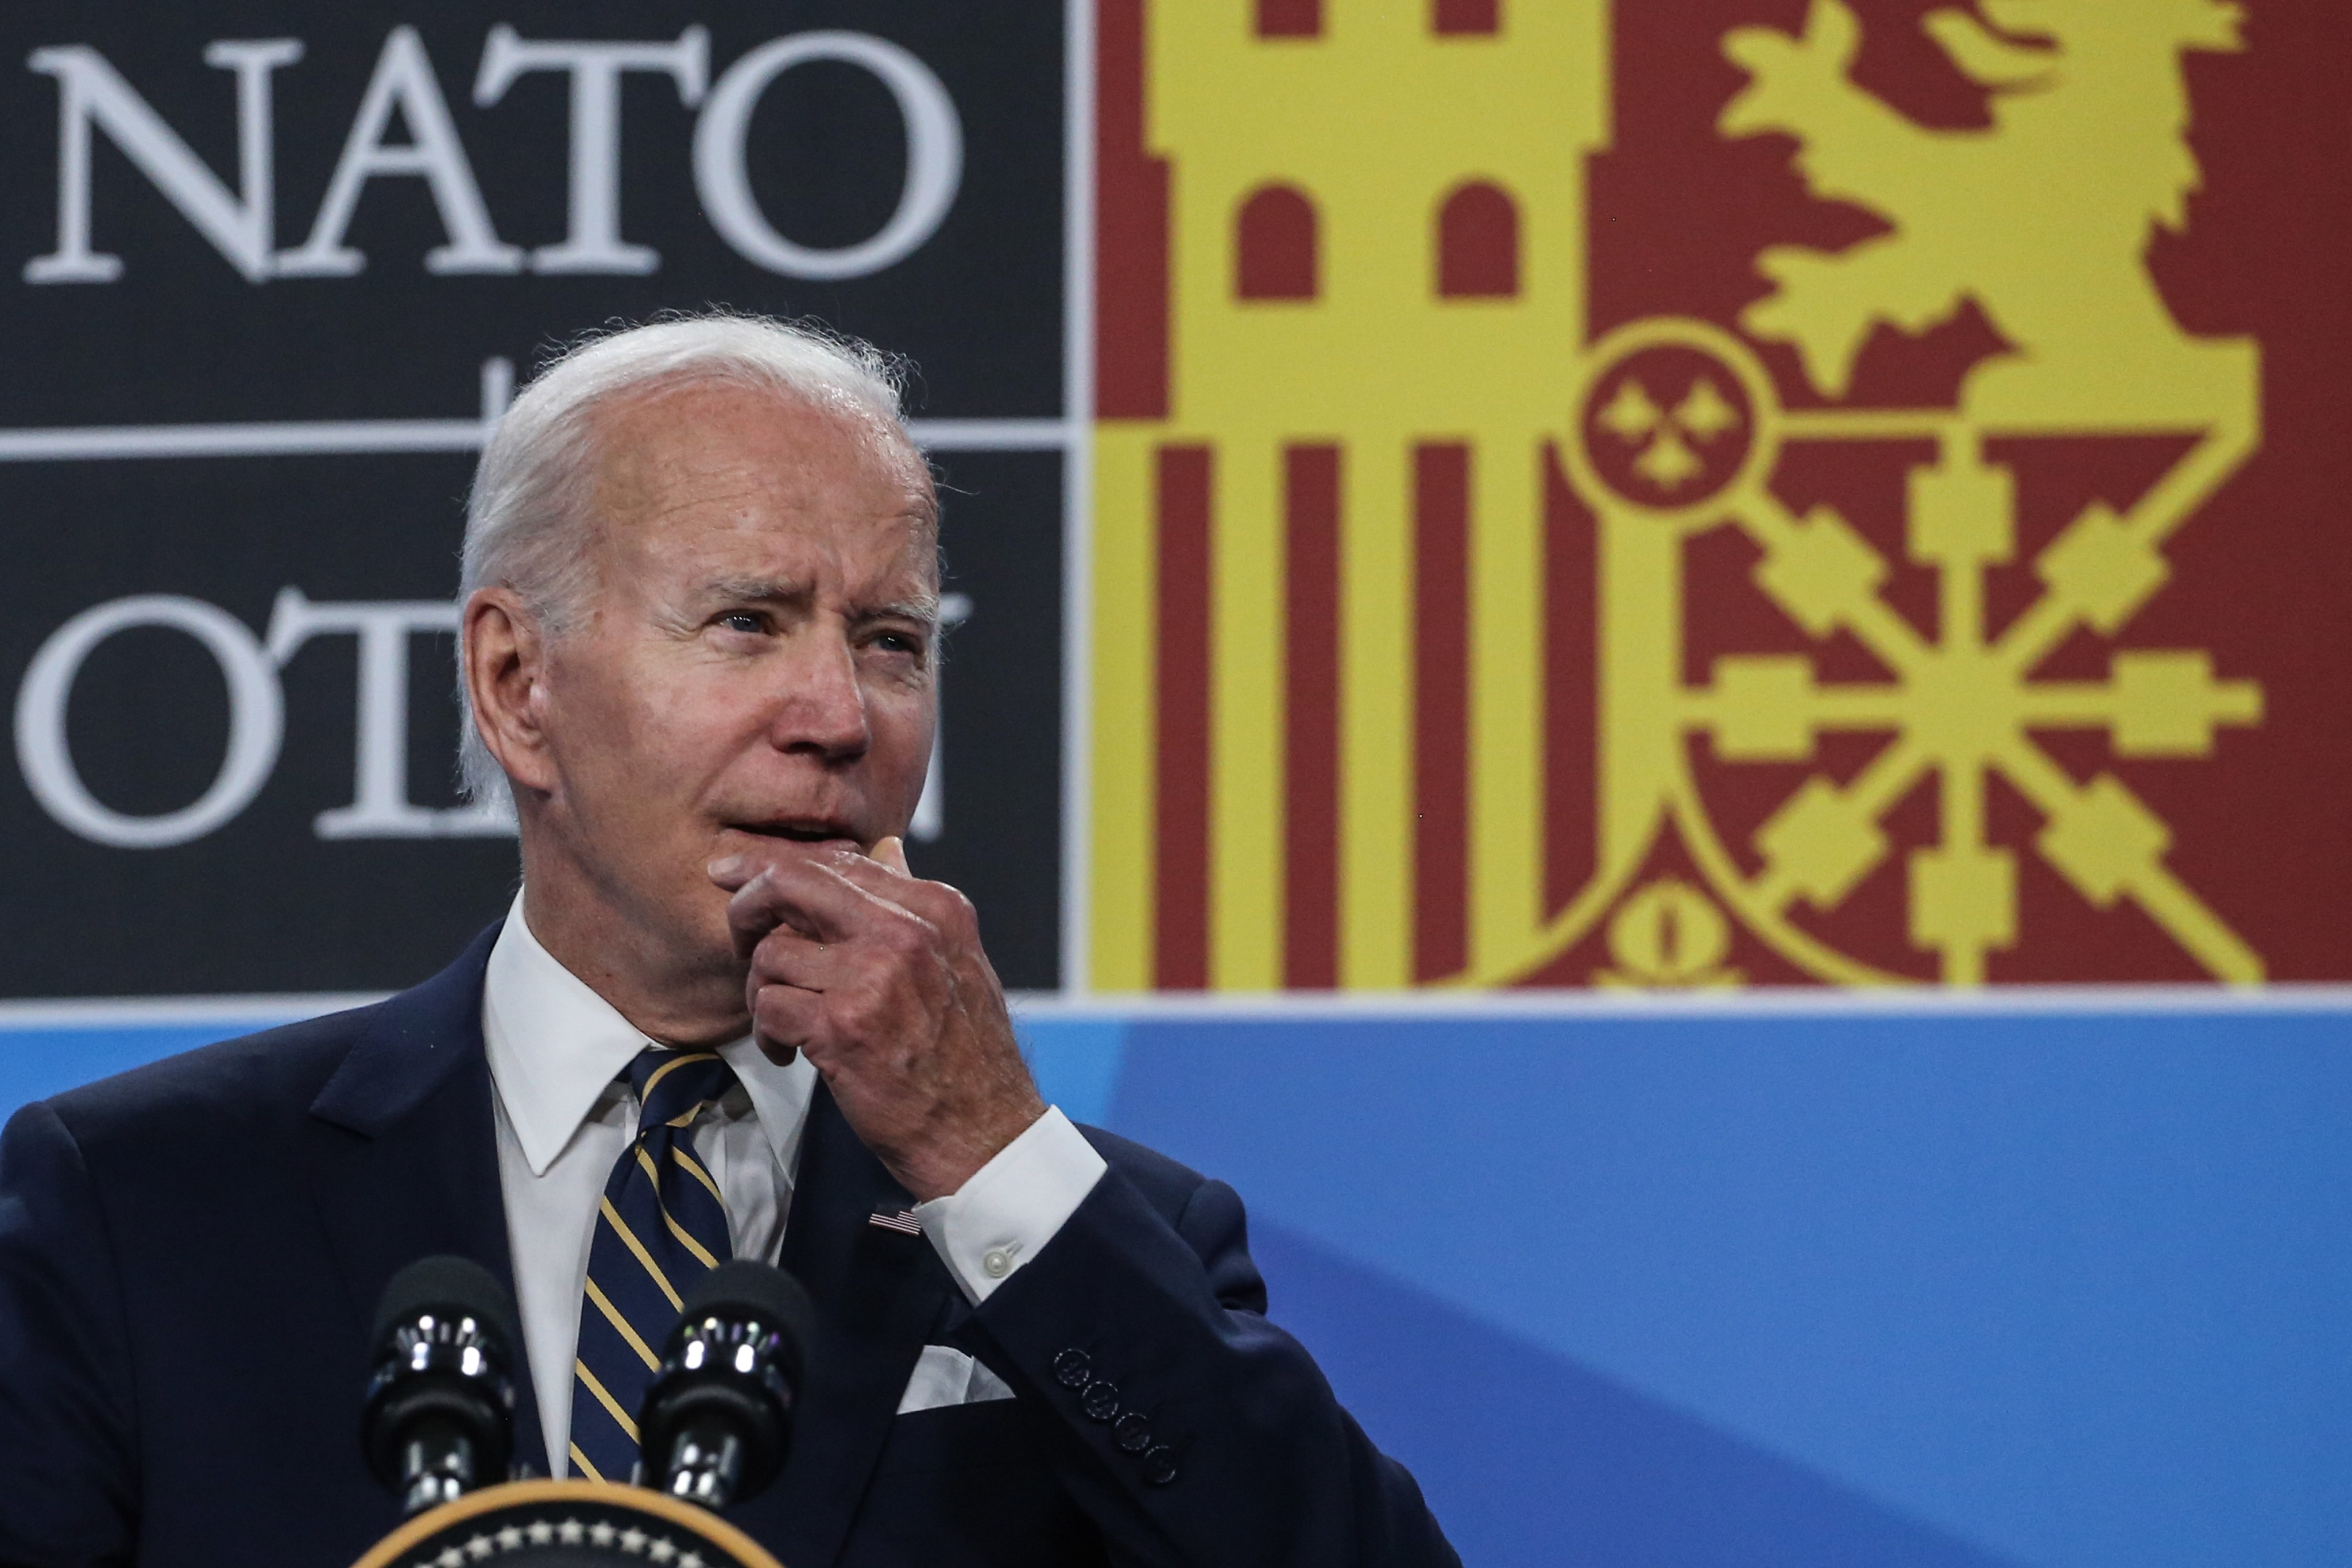 US President Joe Biden attends a news conference following the final day of the Nato summit in Madrid on June 30. Photo: Bloomberg